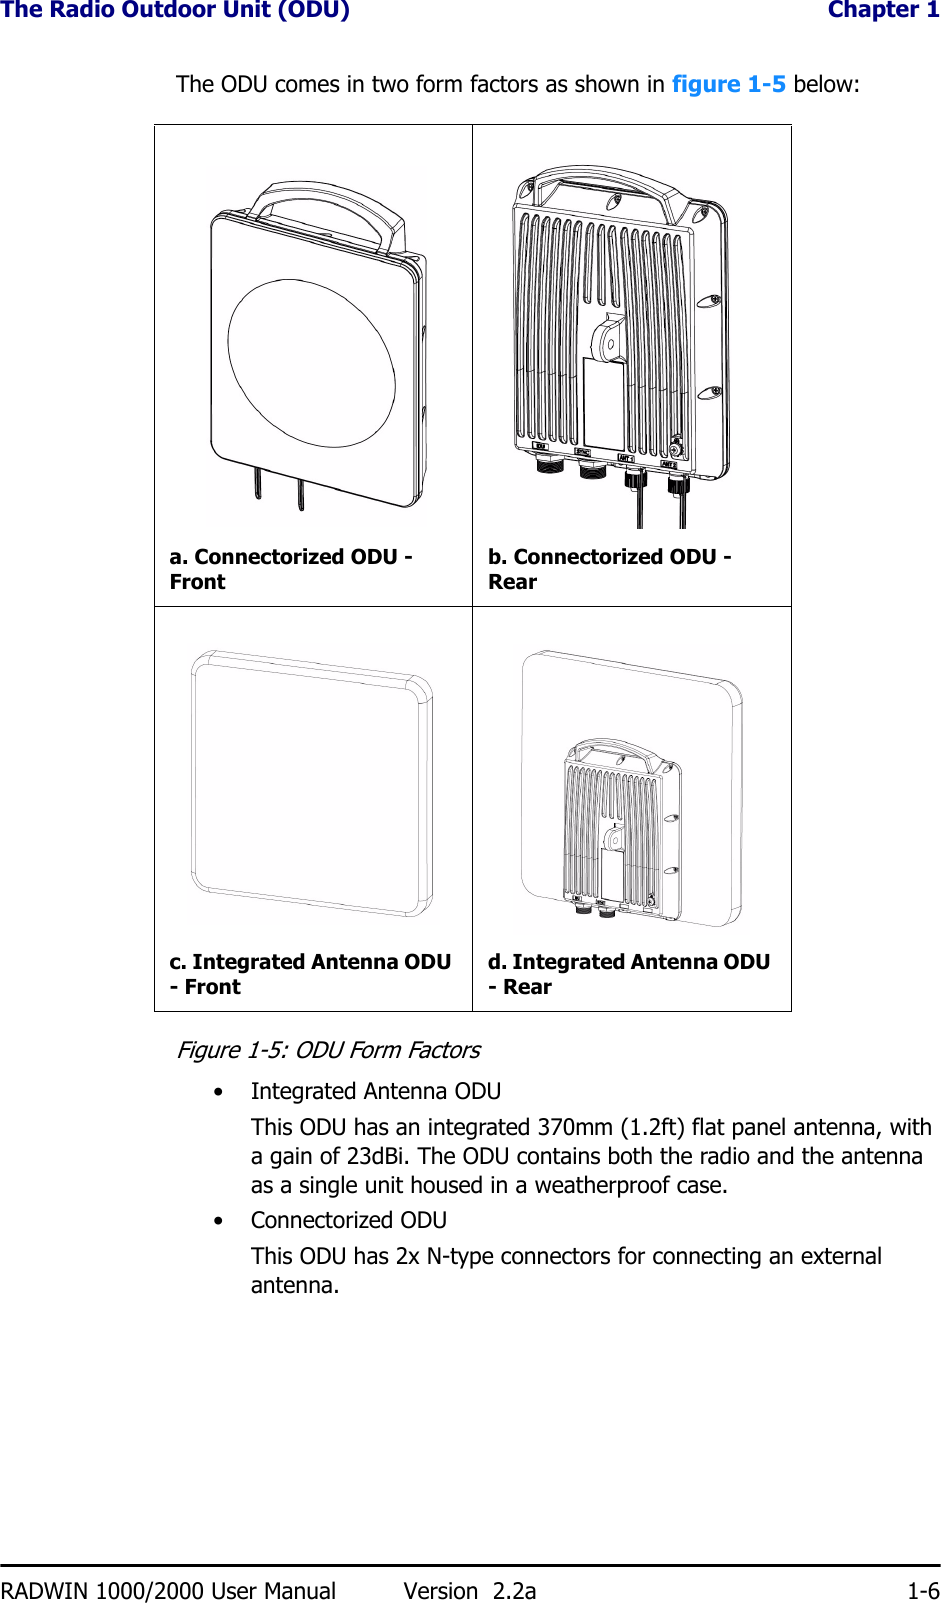 The Radio Outdoor Unit (ODU)  Chapter 1RADWIN 1000/2000 User Manual Version  2.2a 1-6The ODU comes in two form factors as shown in figure 1-5 below:Figure 1-5: ODU Form Factors• Integrated Antenna ODUThis ODU has an integrated 370mm (1.2ft) flat panel antenna, with a gain of 23dBi. The ODU contains both the radio and the antenna as a single unit housed in a weatherproof case.•Connectorized ODUThis ODU has 2x N-type connectors for connecting an external antenna.a. Connectorized ODU - Frontb. Connectorized ODU - Rearc. Integrated Antenna ODU - Frontd. Integrated Antenna ODU - Rear